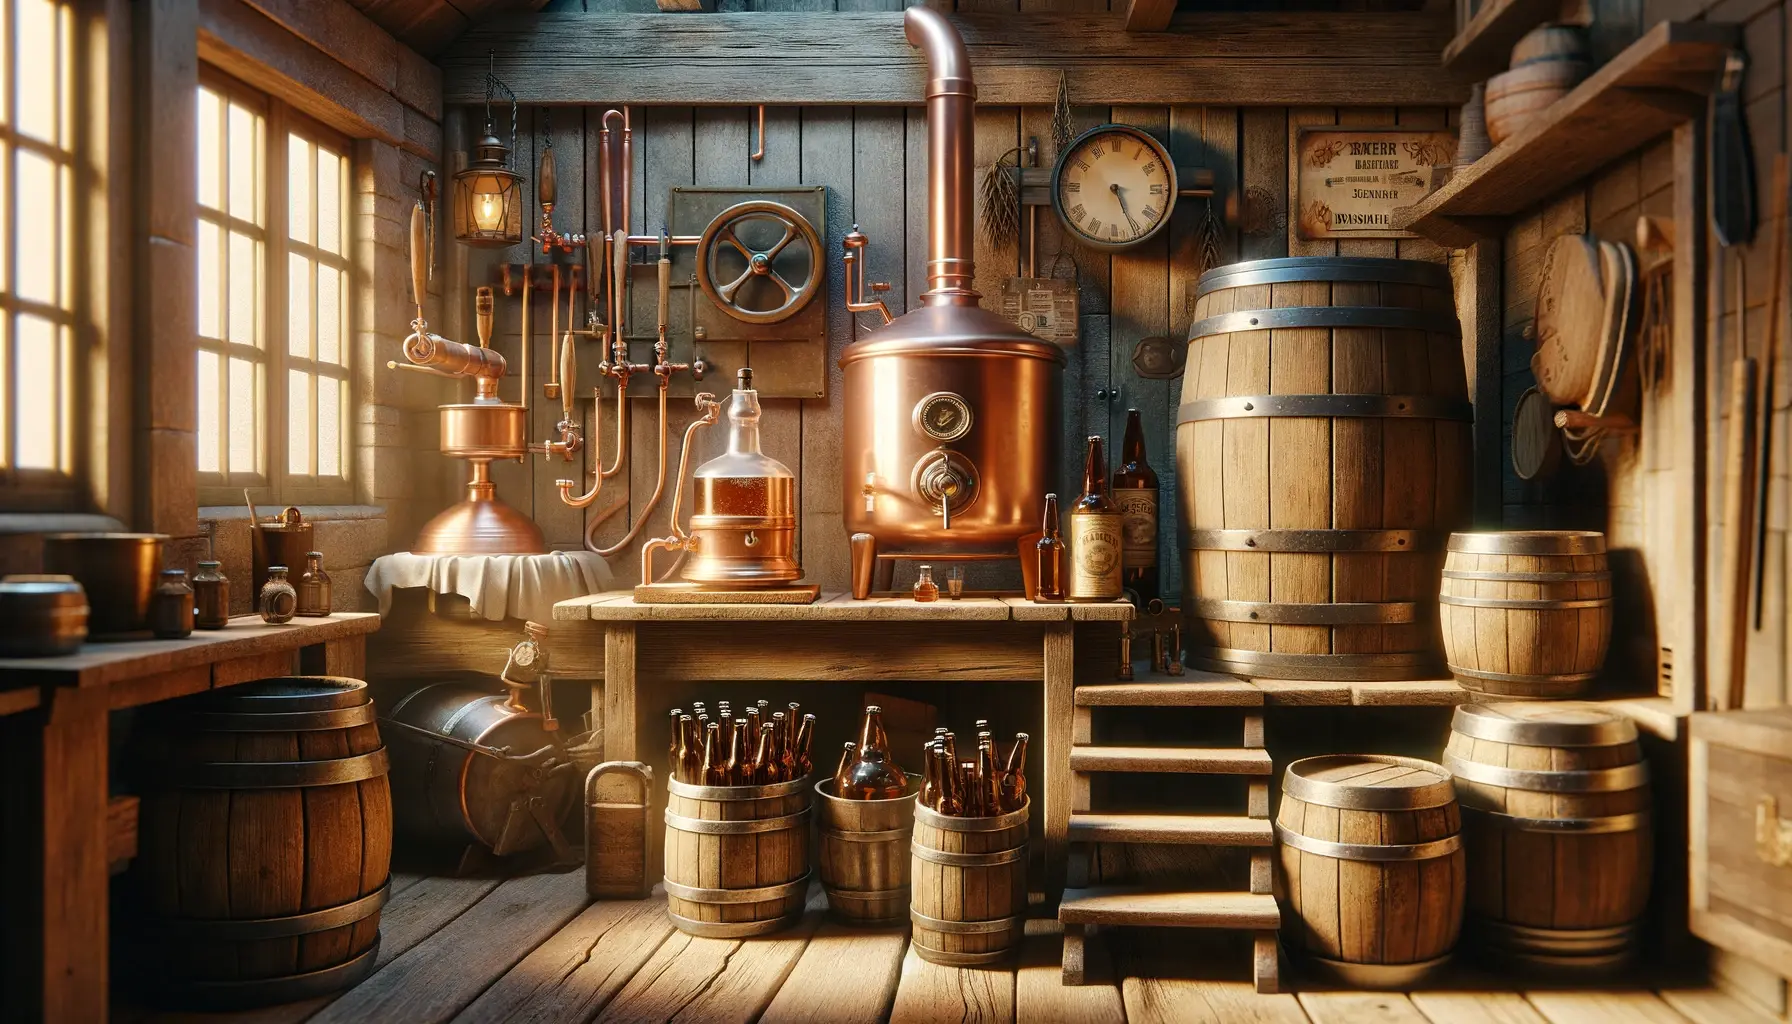 a rustic home brewery setting with vintage brewing equipment, wooden surfaces, and a warm, inviting atmosphere